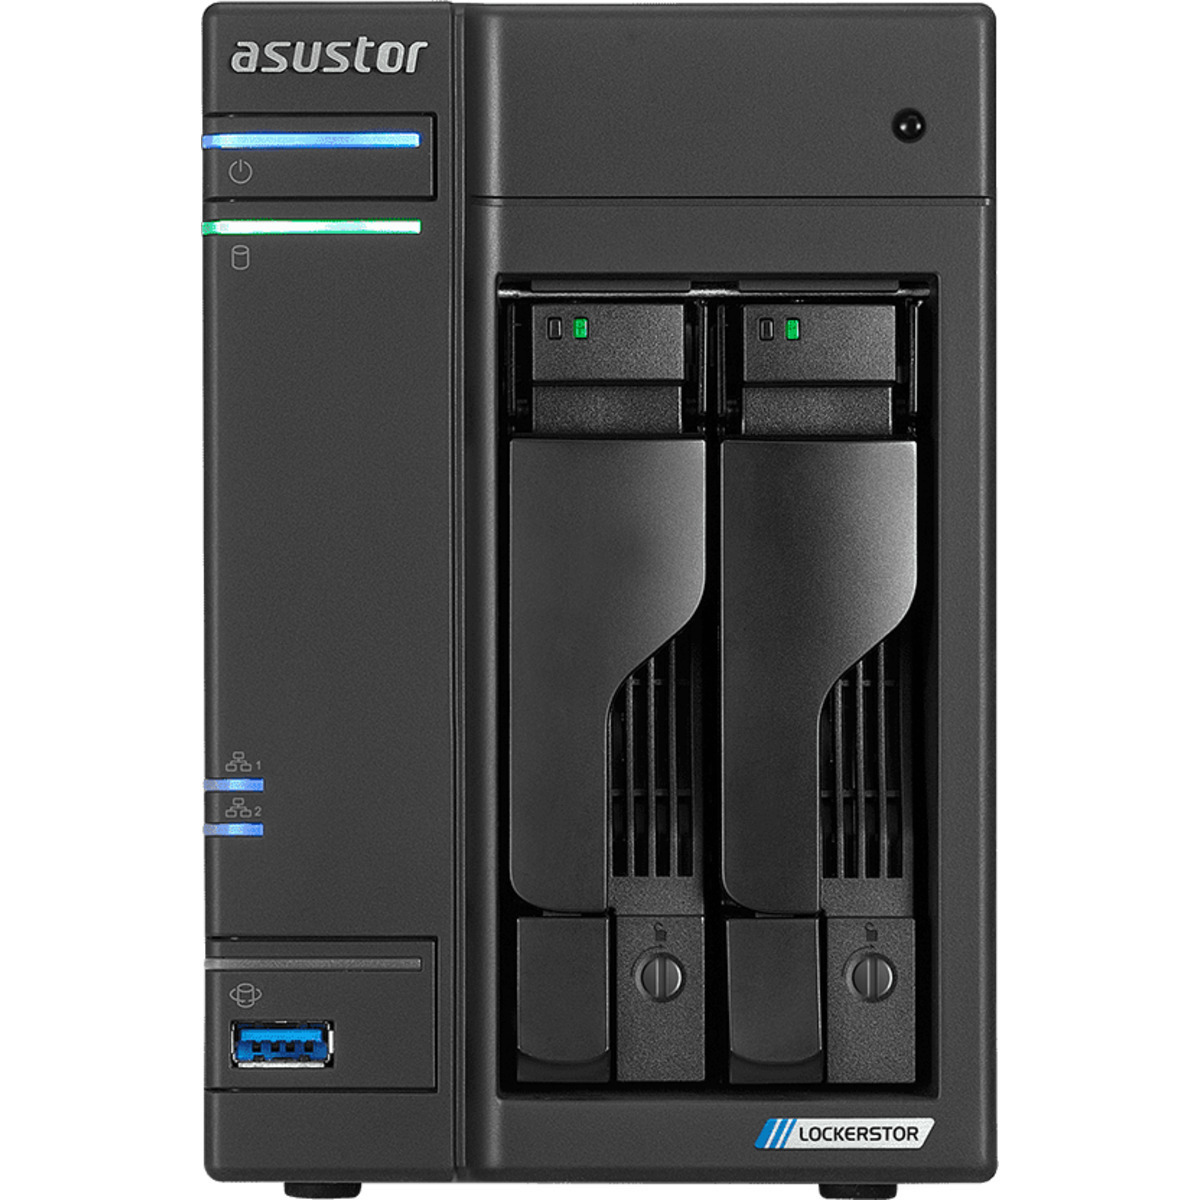 buy $1427 ASUSTOR AS6602T Lockerstor 2 8tb Desktop NAS - Network Attached Storage Device 2x4000gb Samsung 870 QVO MZ-77Q4T0 2.5 SATA 6Gb/s SSD CONSUMER Class Drives Installed - Burn-In Tested - FREE RAM UPGRADE - nas headquarters buy network attached storage server device das new raid-5 free shipping usa christmas new year holiday sale AS6602T Lockerstor 2